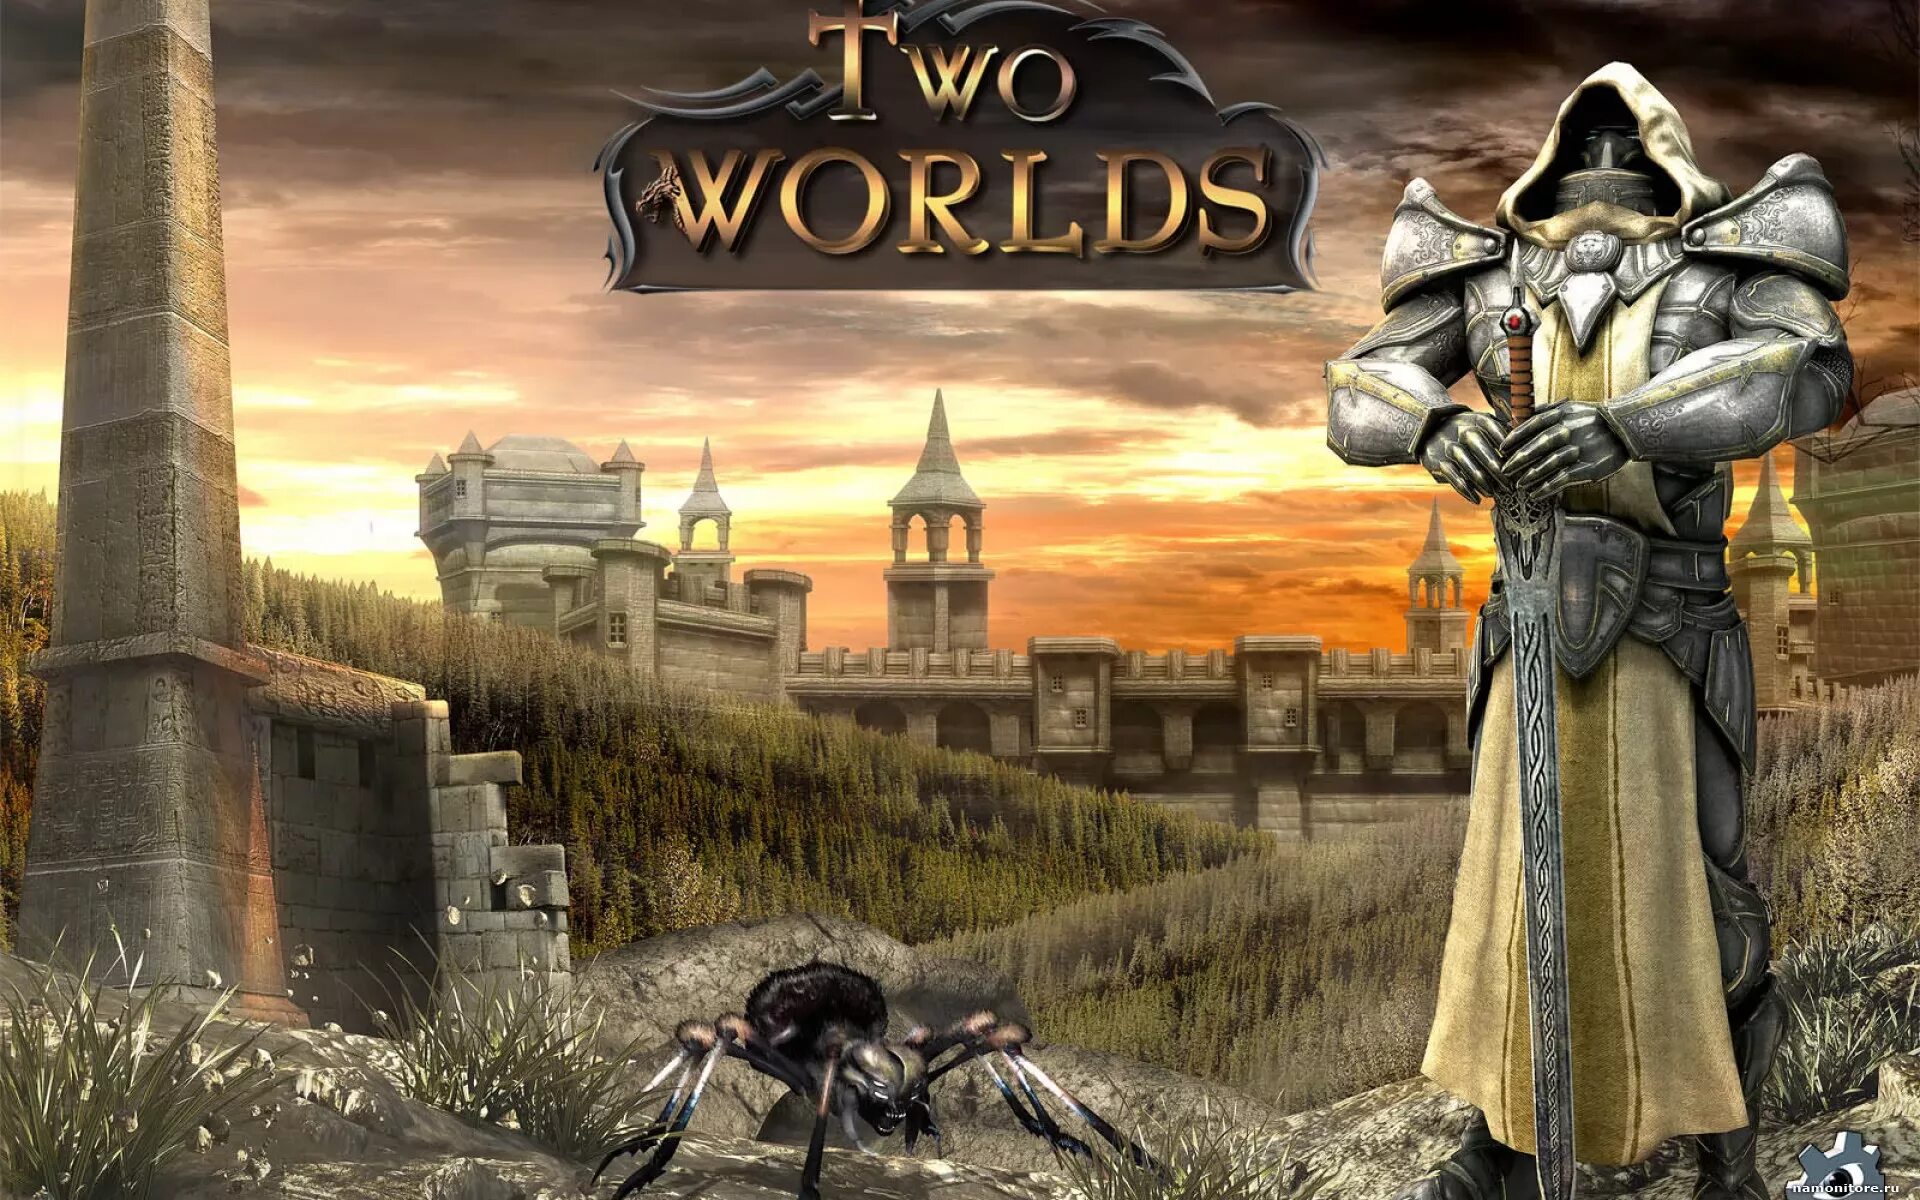 Игра two Worlds Epic Edition. Two Worlds 1 игра. Two Worlds 2 Epic Edition. Two Worlds Epic Edition обложка.